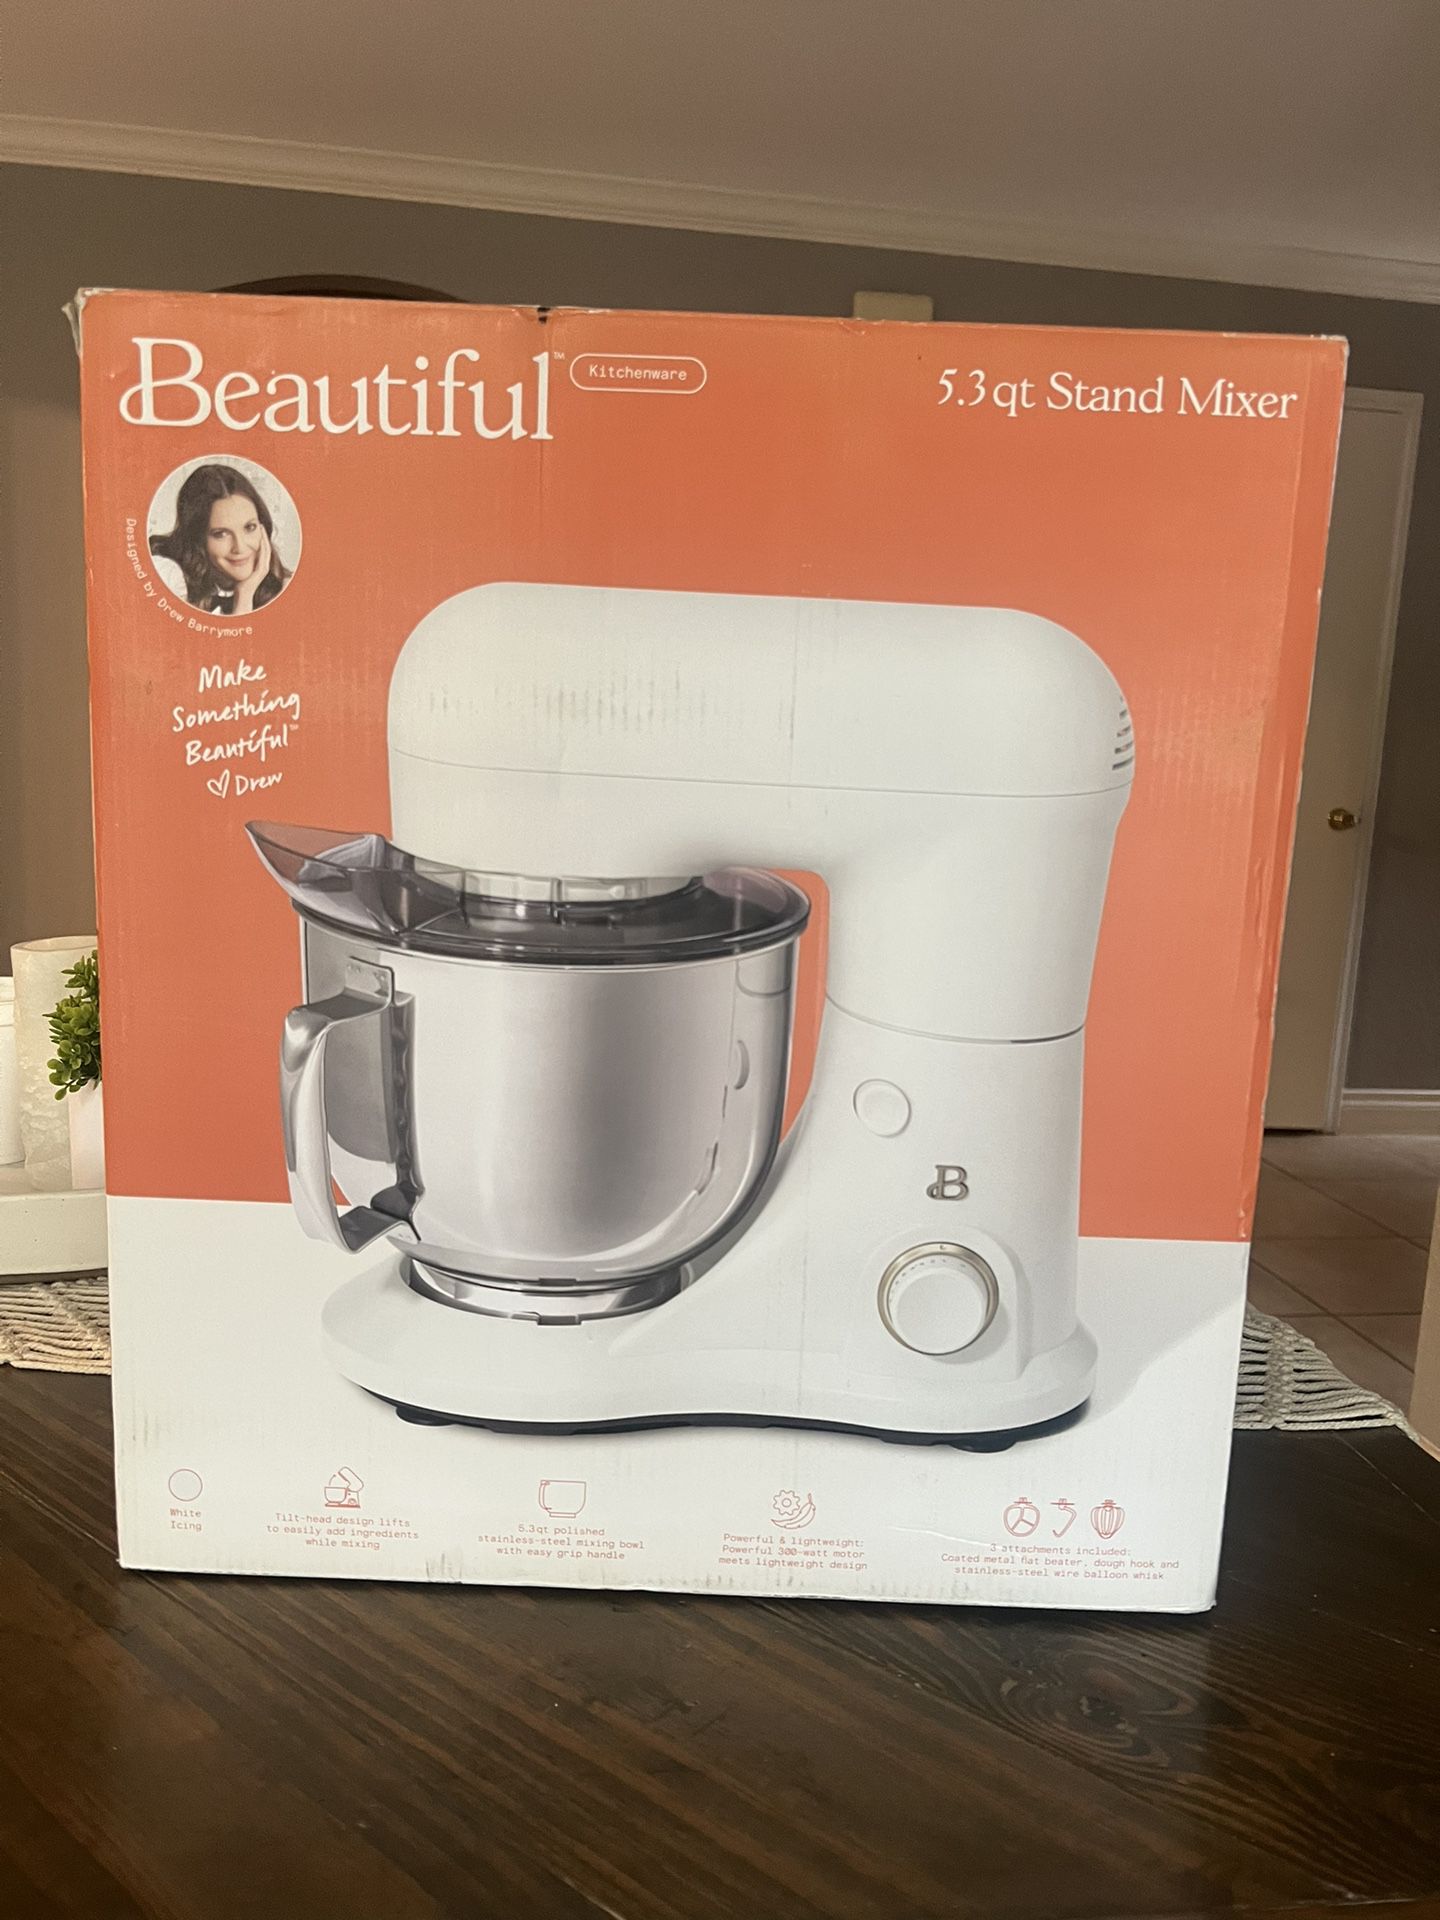 Drew Barrymore Coffee Maker Almost New for Sale in Pasadena, TX - OfferUp